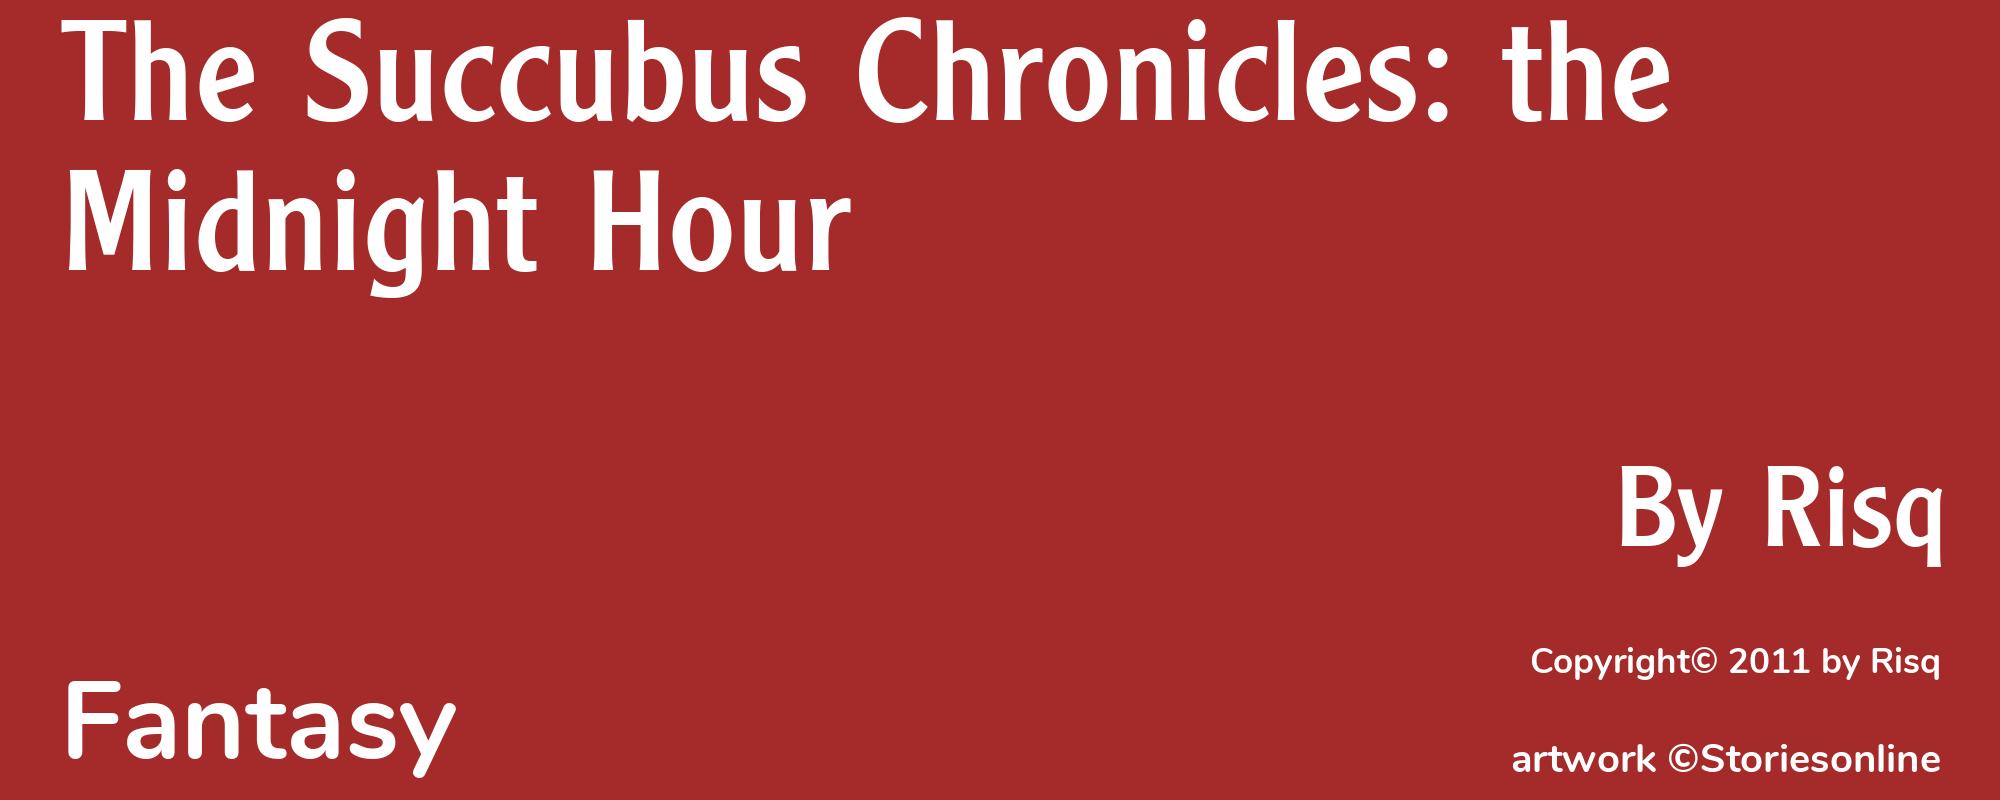 The Succubus Chronicles: the Midnight Hour - Cover